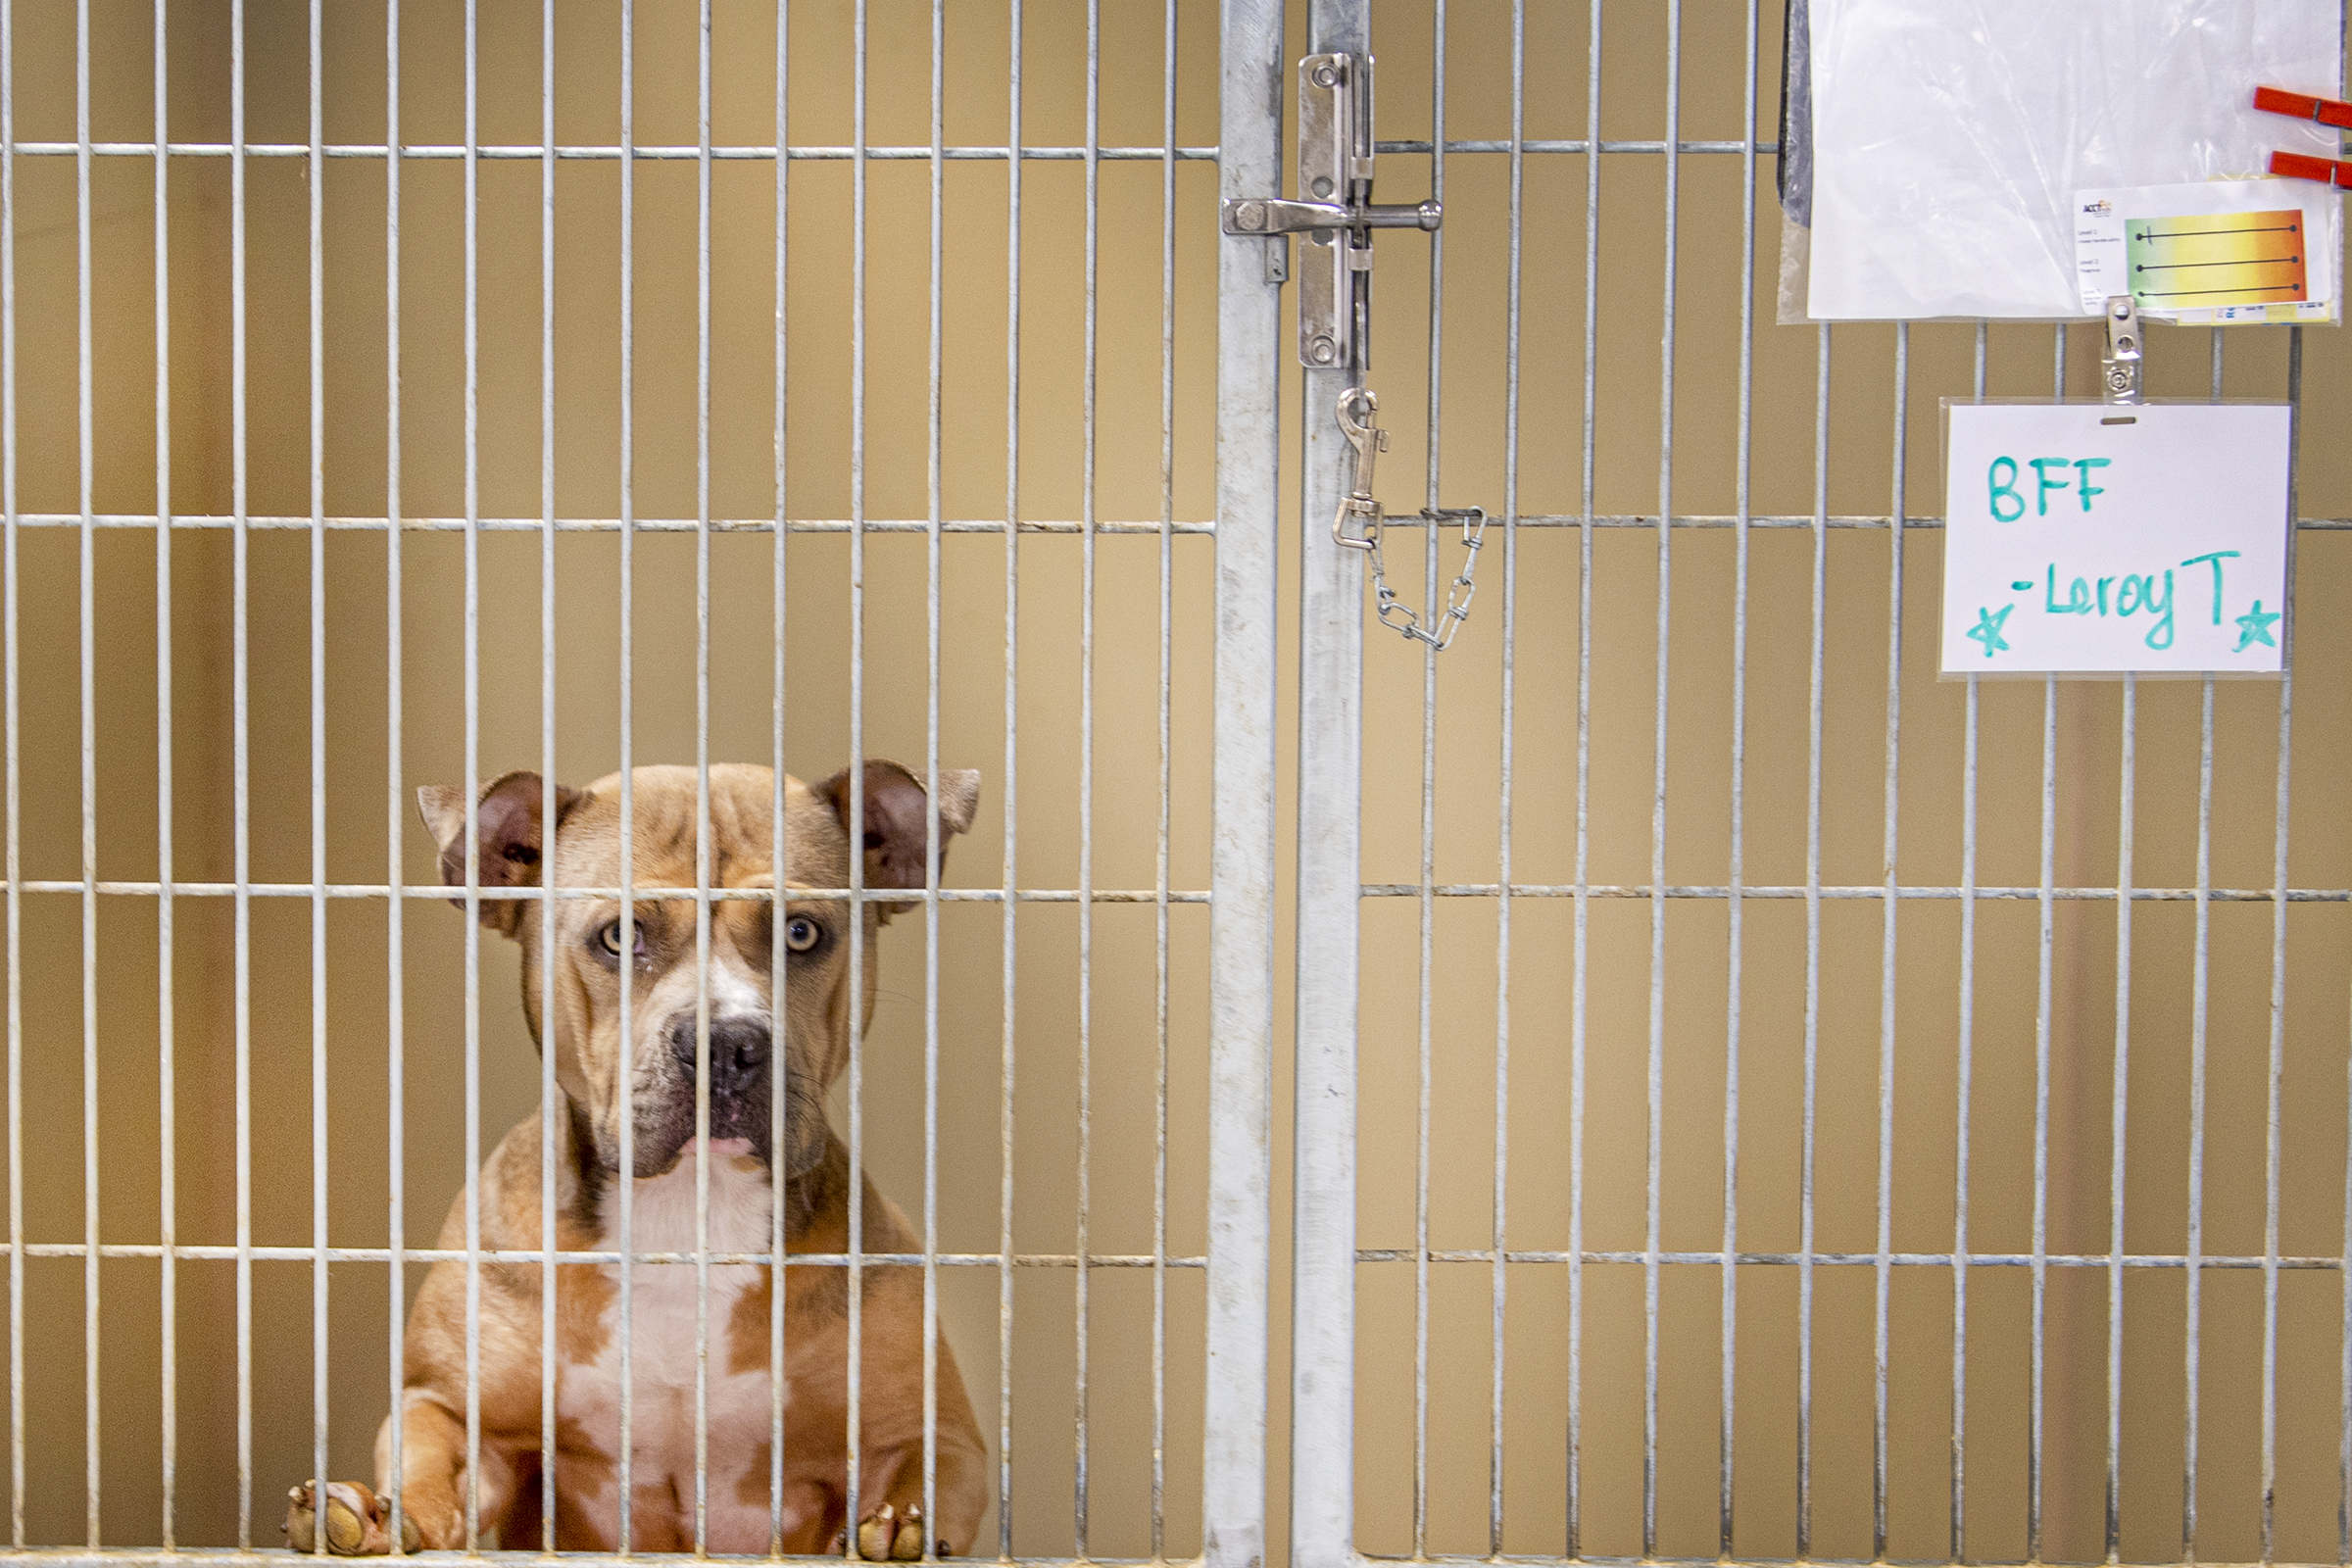 ACCT Philly has had leadership and funding struggles. What's next for the animal  shelter?